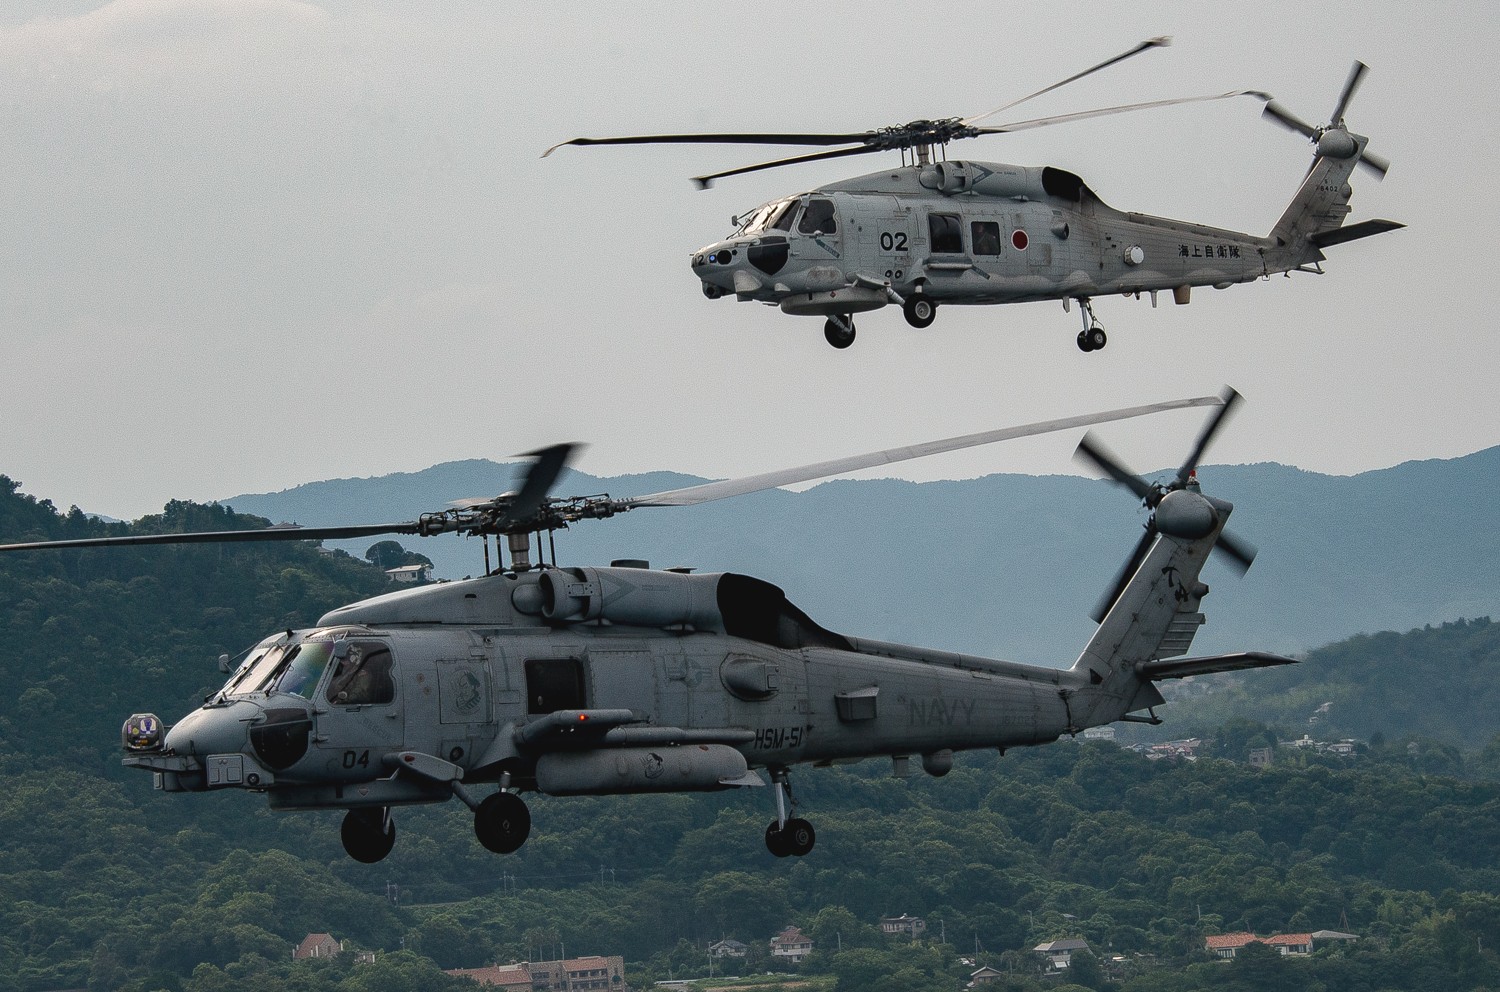 hsm-51 warlords helicopter maritime strike squadron mh-60r seahawk navy 2016 06